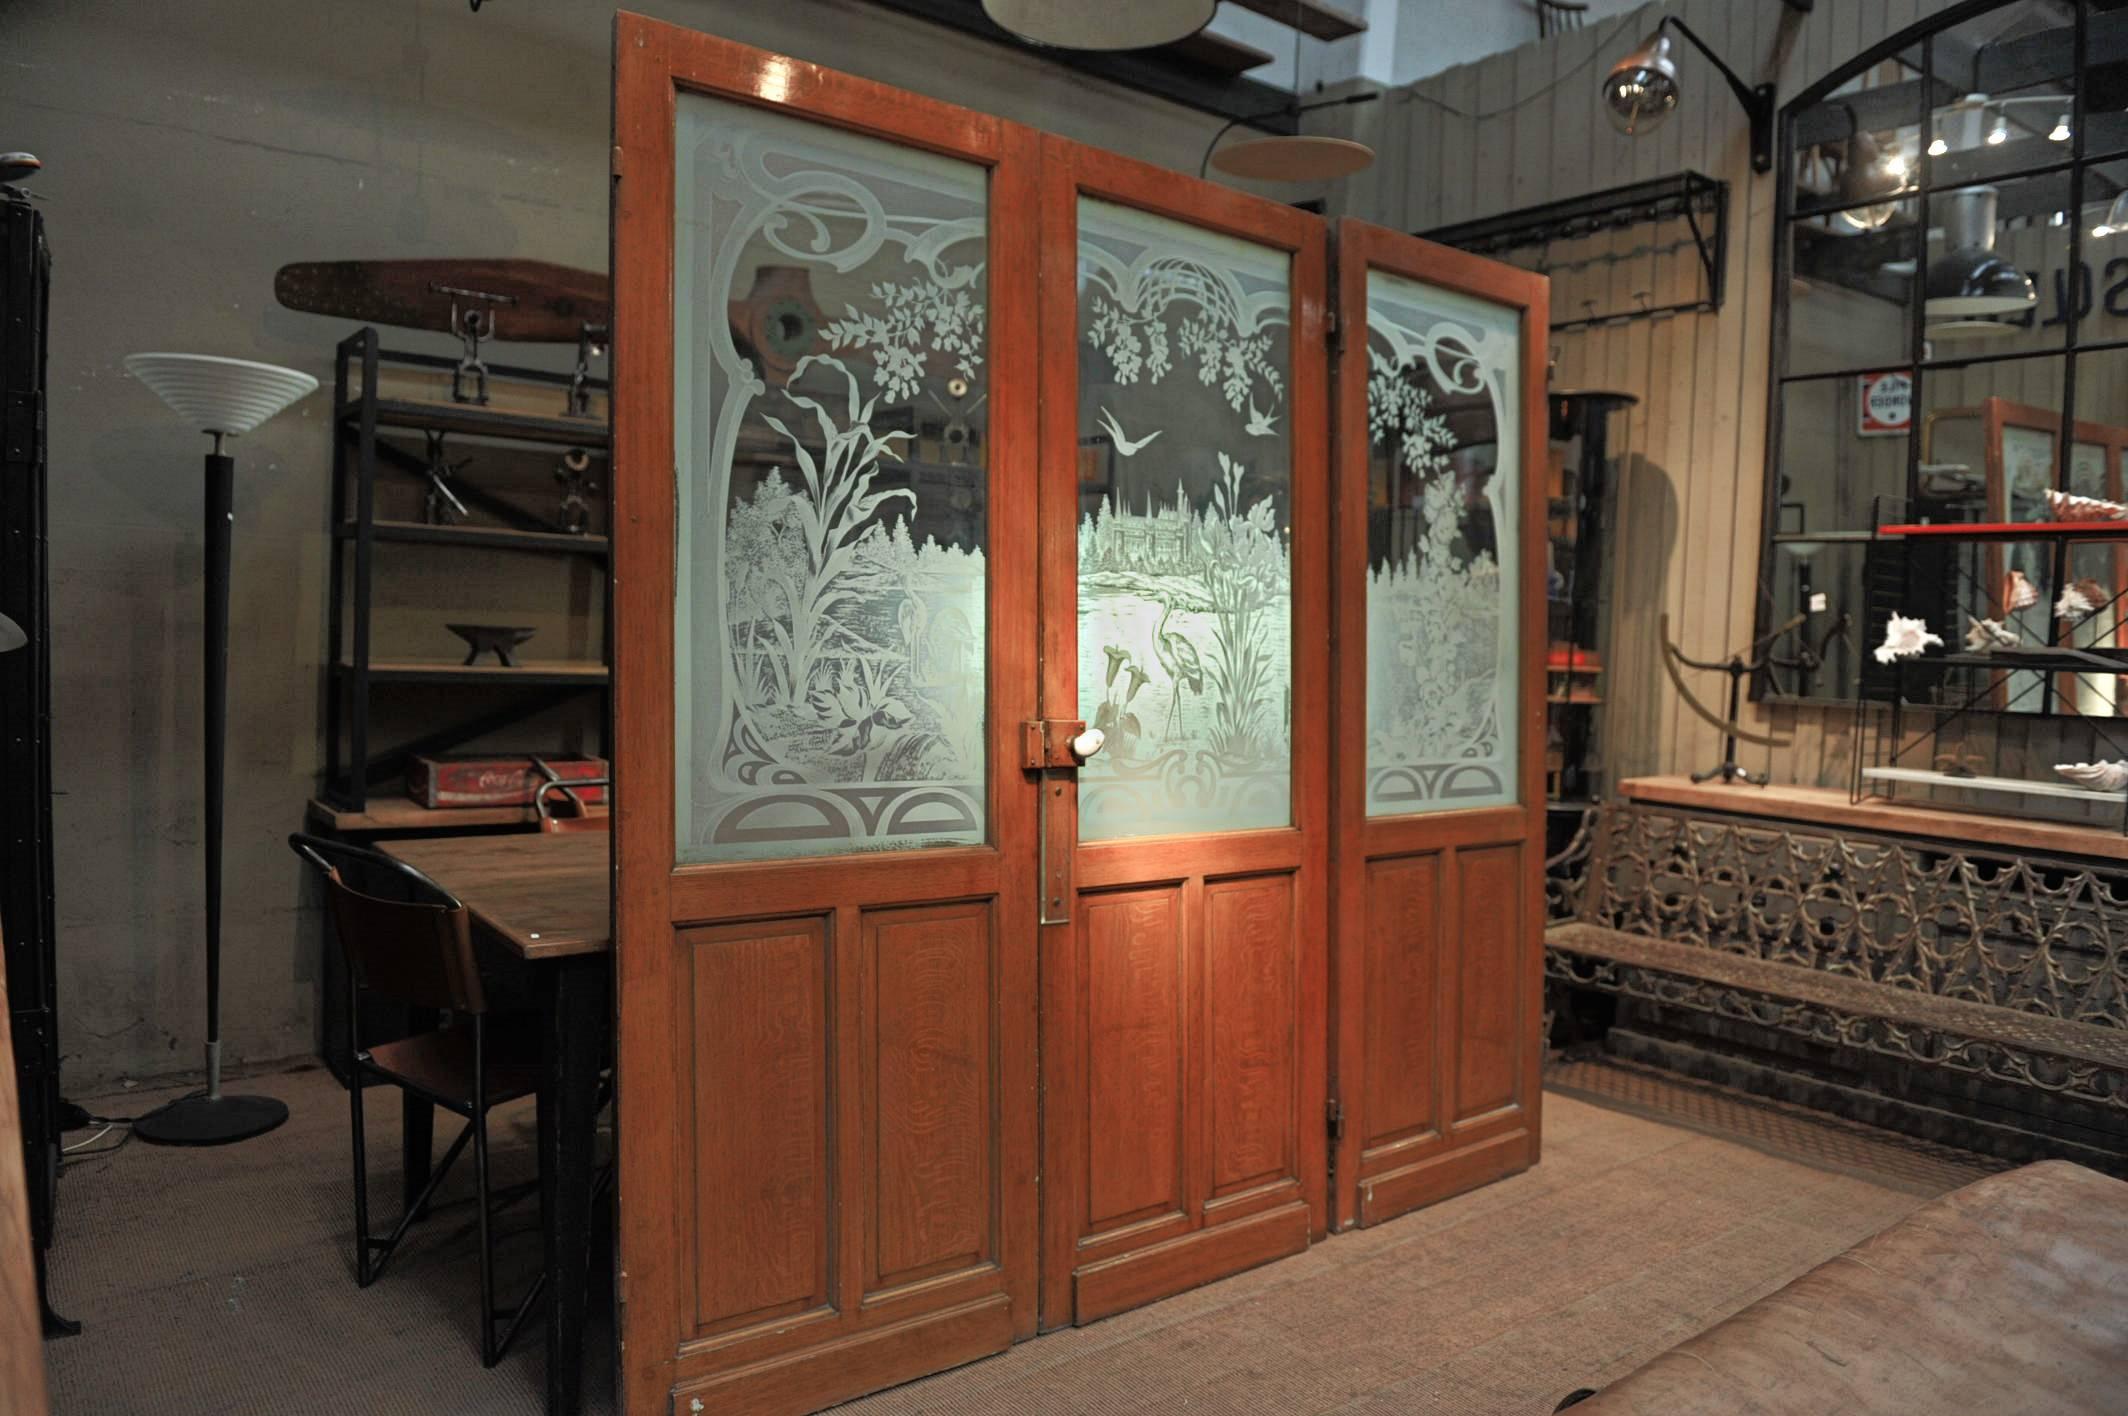 Set of three French interior vintage Art Nouveau pine wood doors, original faux bois painting and carved glass with herons, birds, and flowers Art Nouveau decor, all in excellent condition. Each door is 75 cm large (29.72 inches) weight 20 kg each.